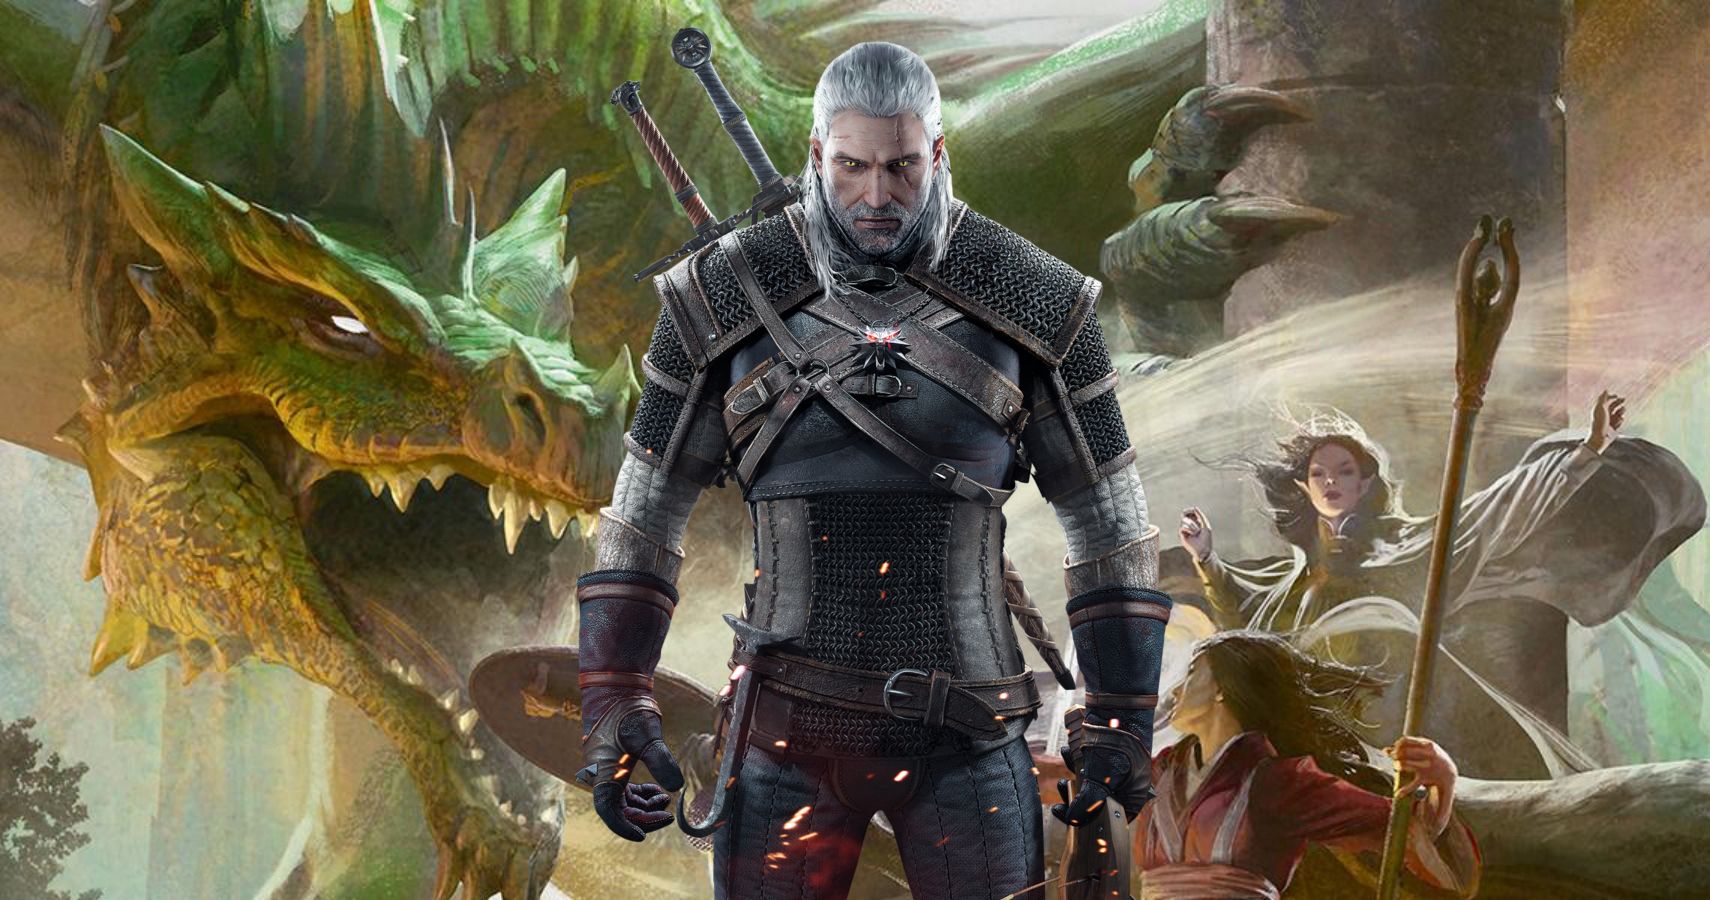 How To Build Geralt Of Rivia In Dungeons & Dragons